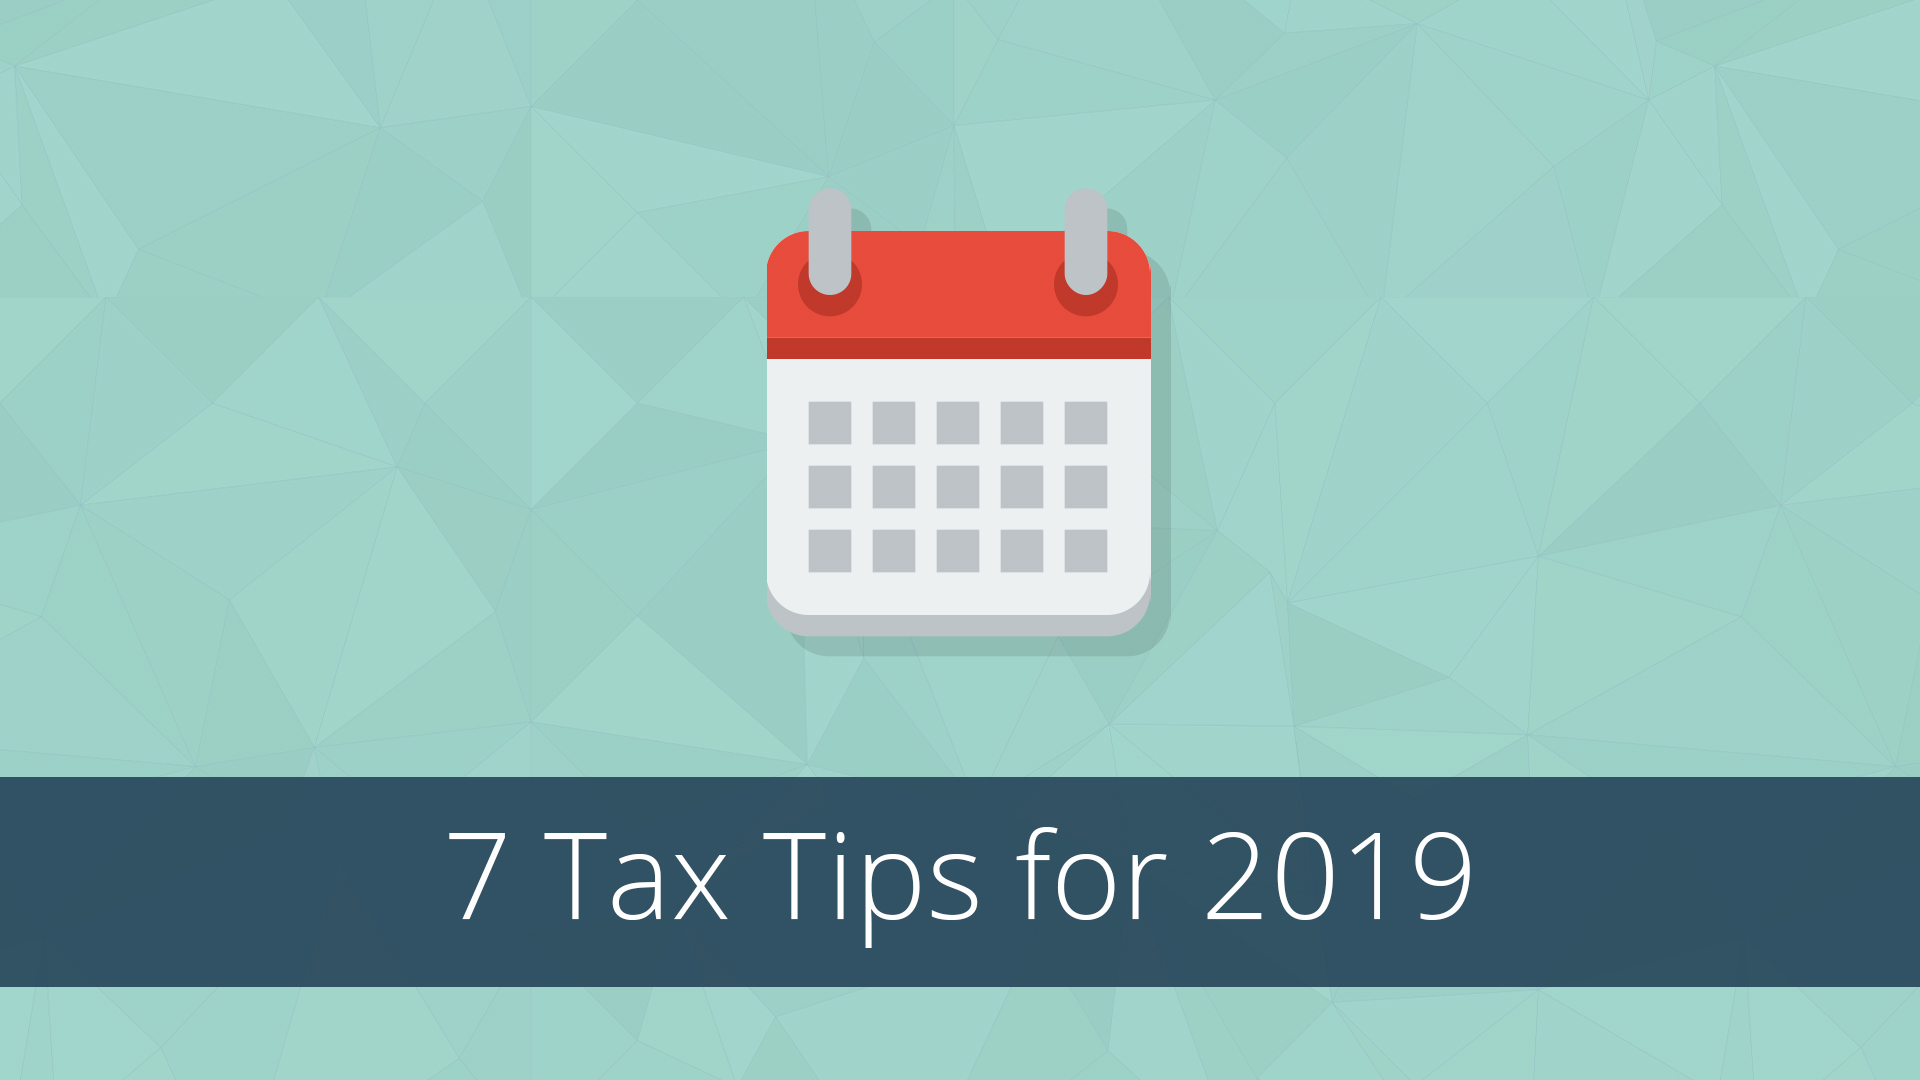 7 Tax Tips for 2019